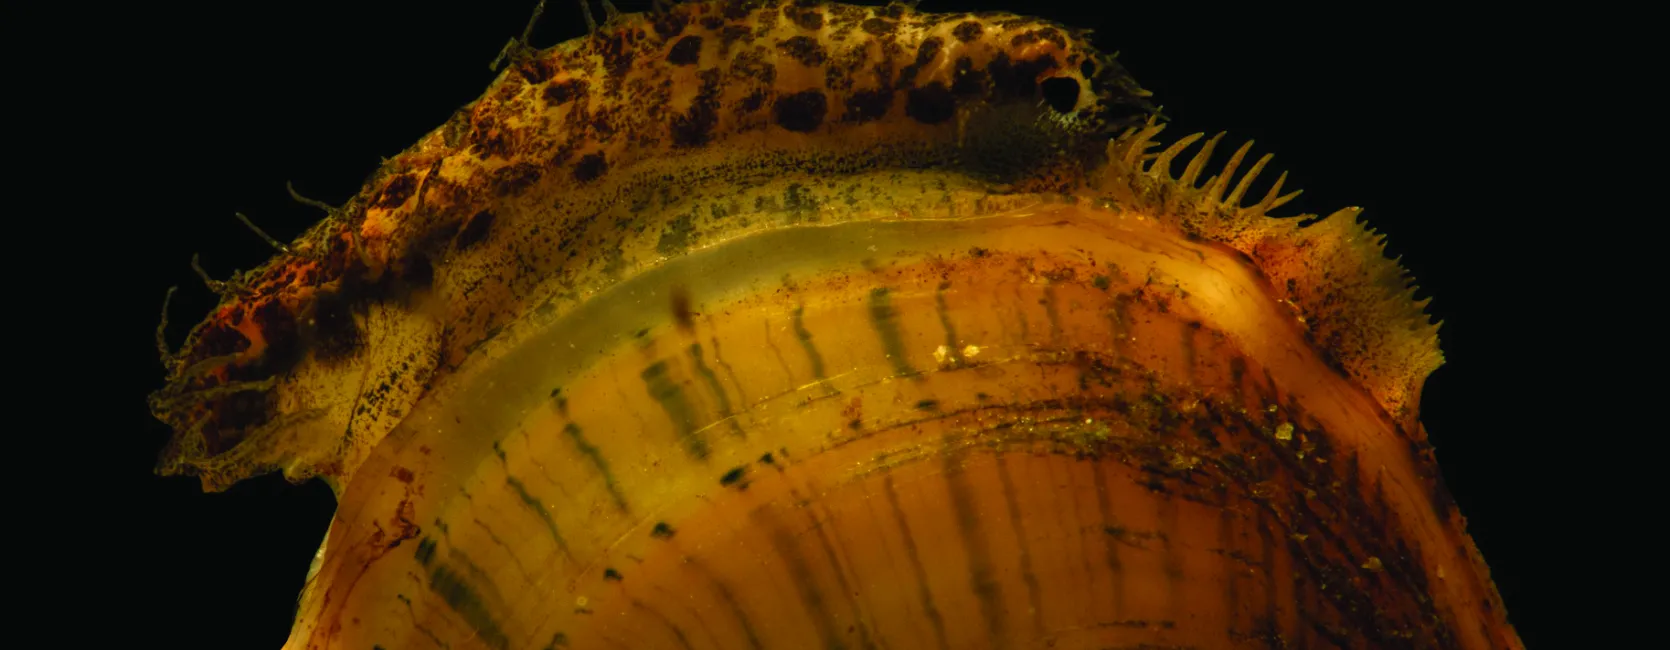 A closeup photo of a freshwater mussel